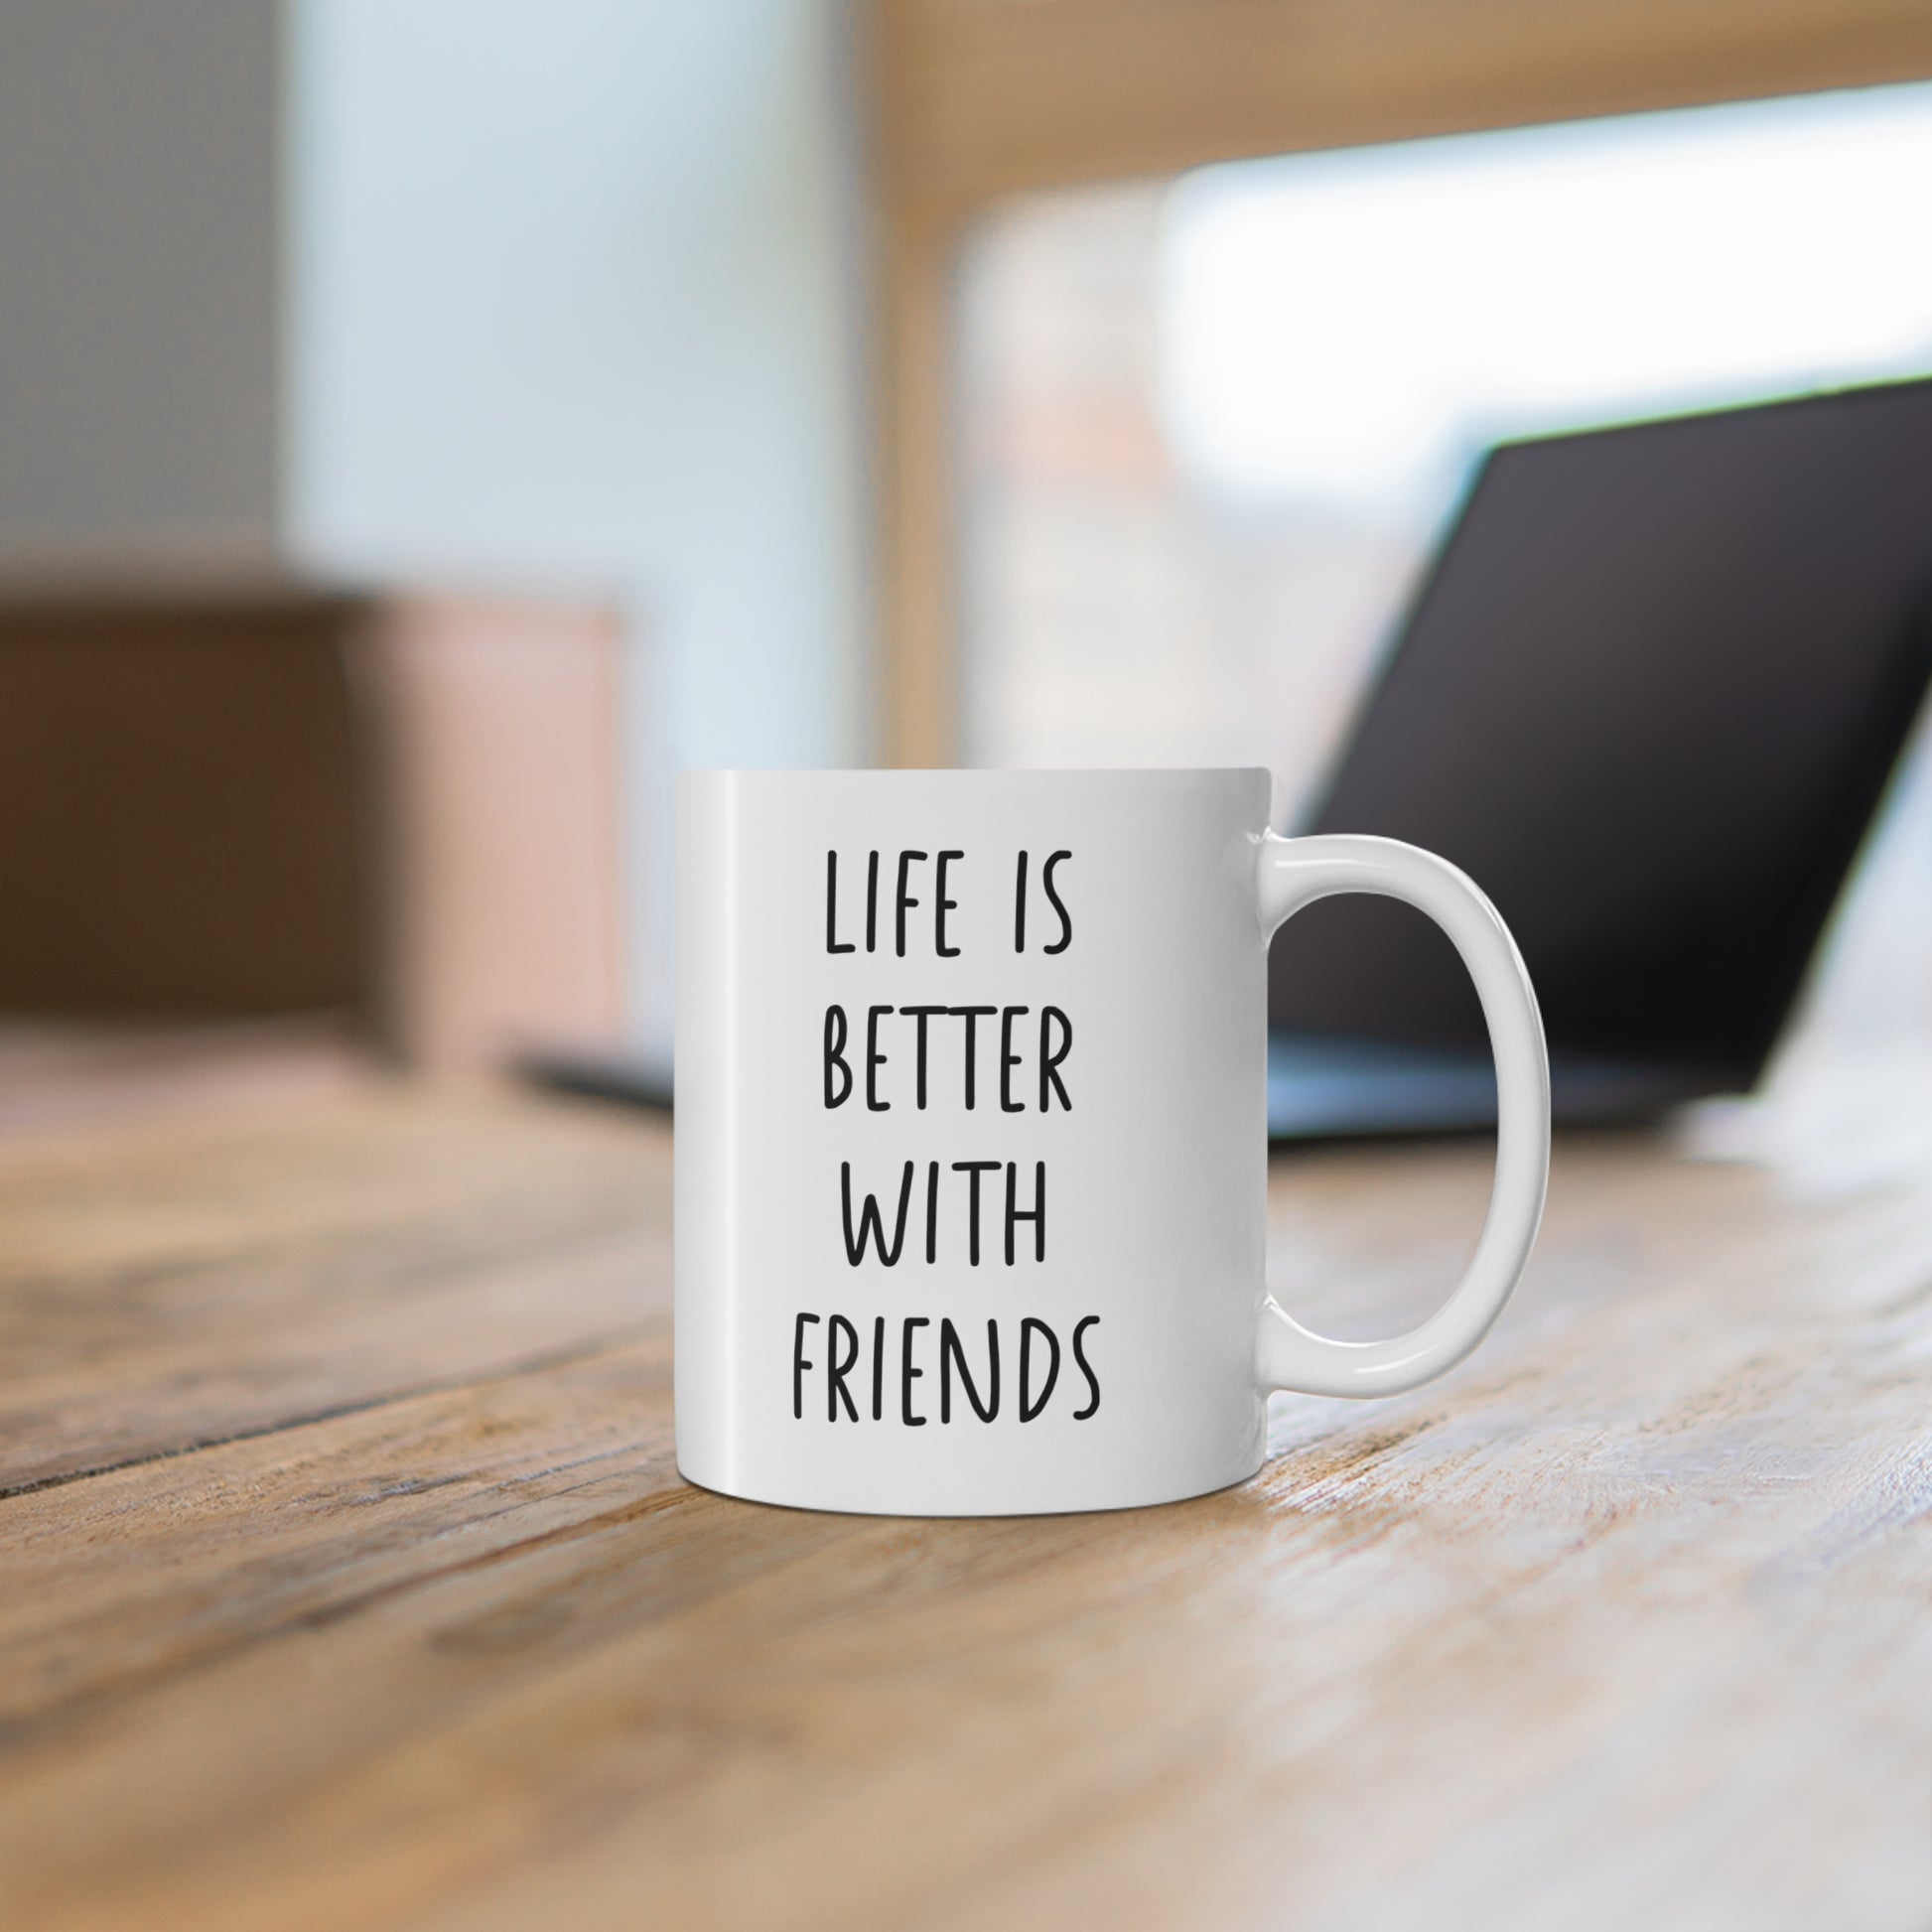 1oz ceramic mug with quote Life Is Better With Friends